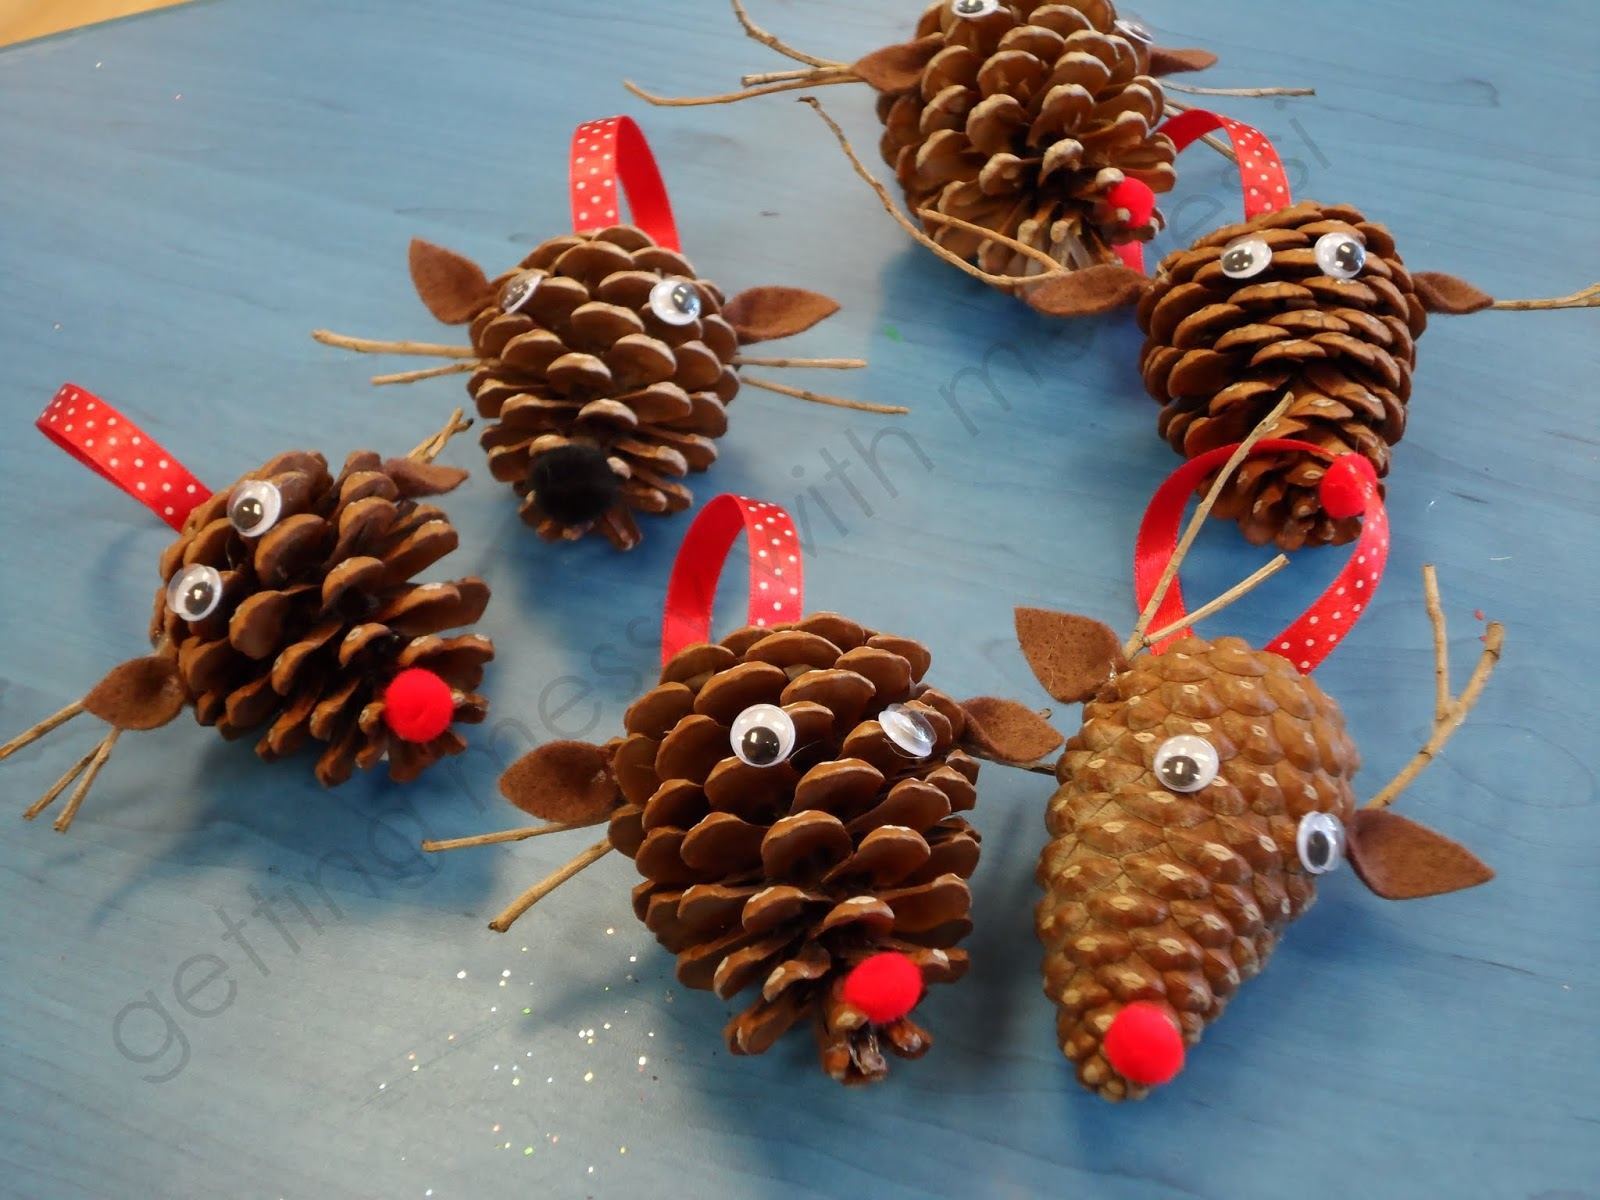 32 Homemade Eco-Friendly Christmas Decorations That Look Stunning